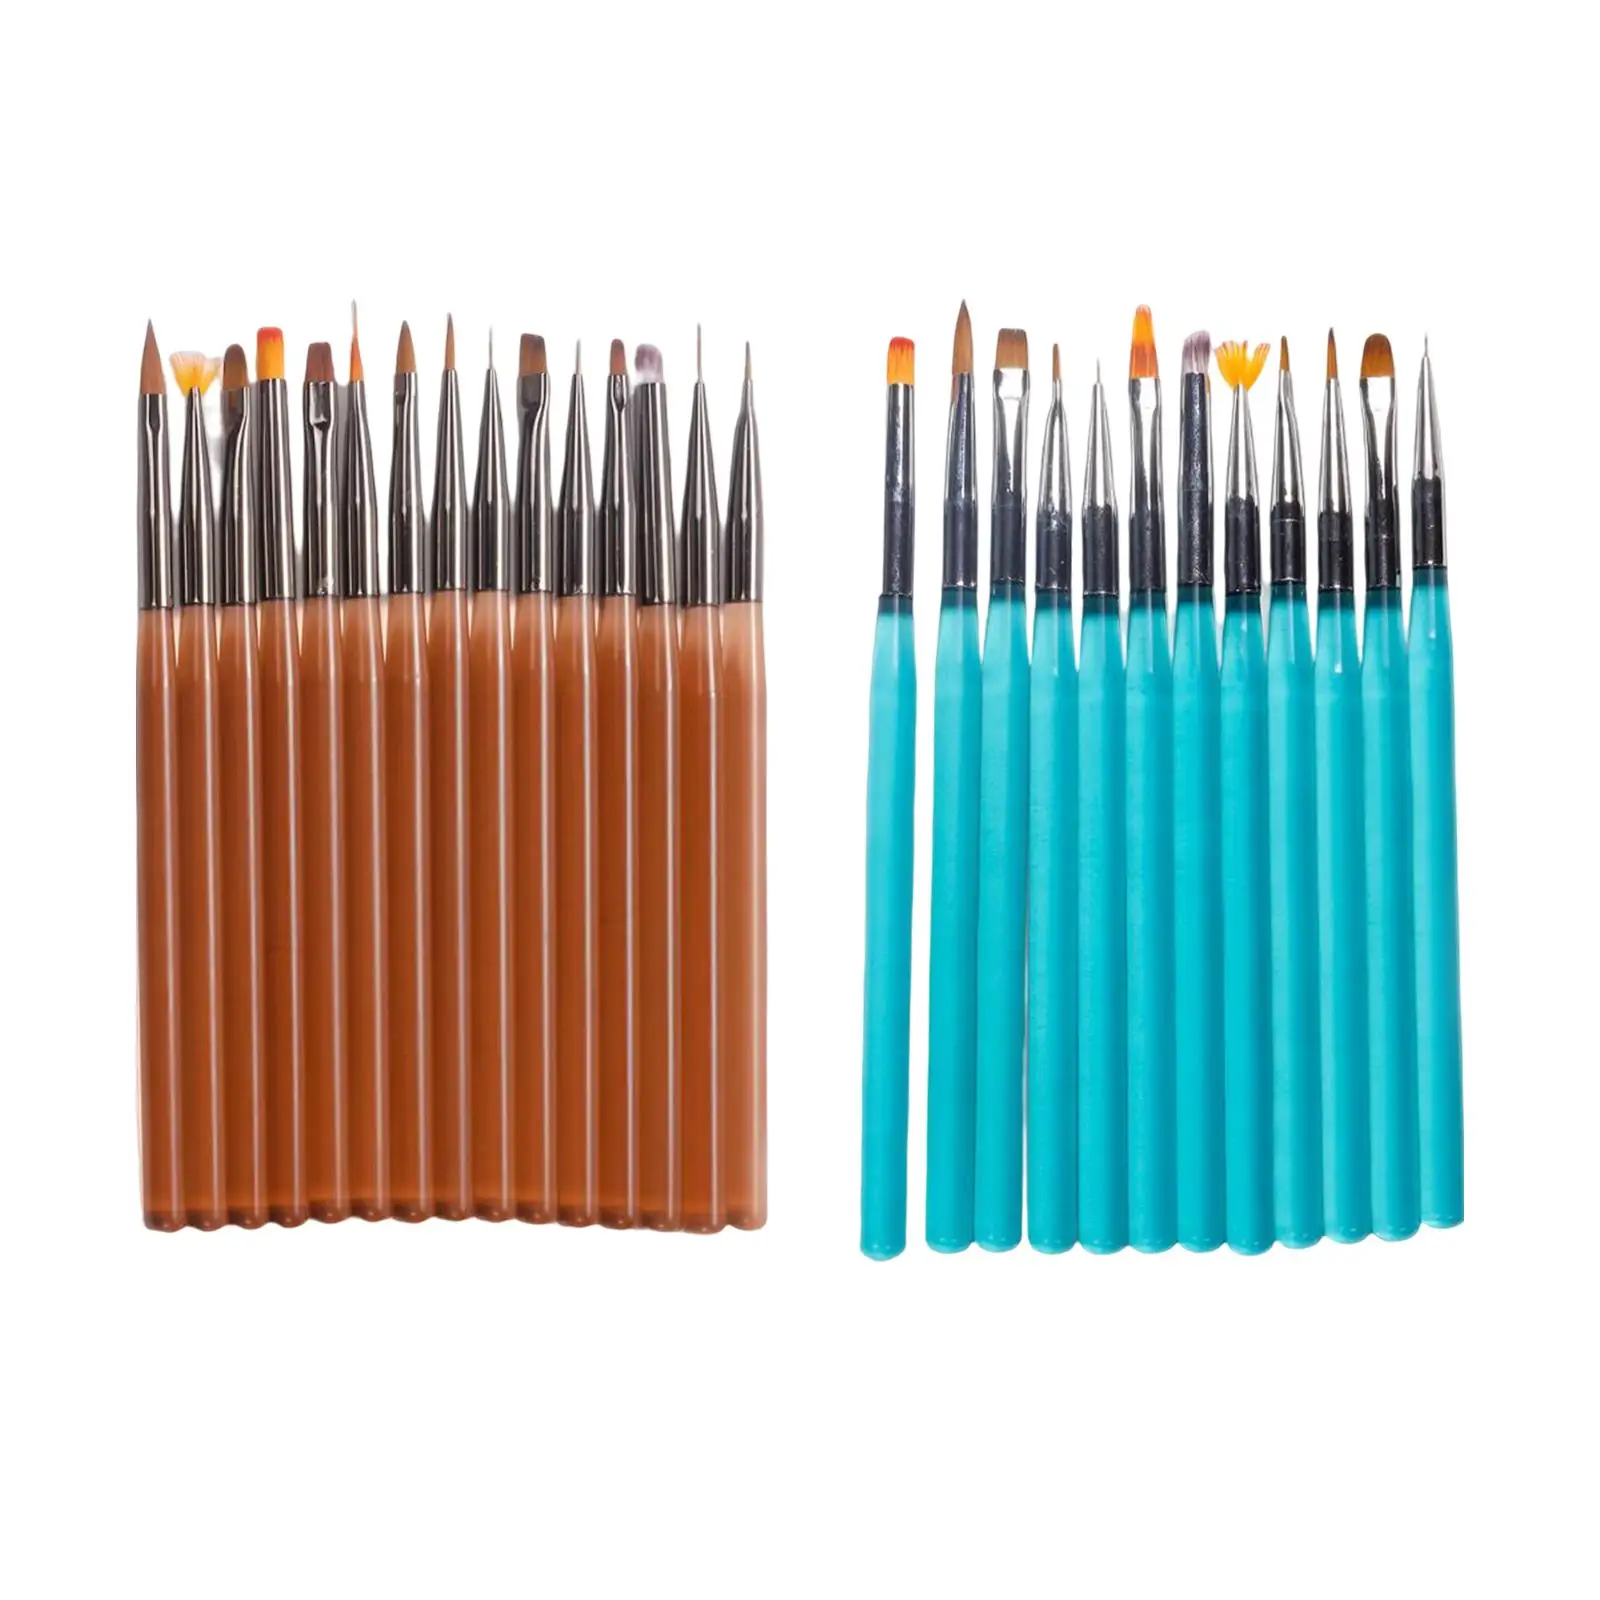 Nail Art Brushes Set Nail Painting Brushes for Women Girls Lightweight Drawing Tools Nail Liner Brushes for Salon Use Home